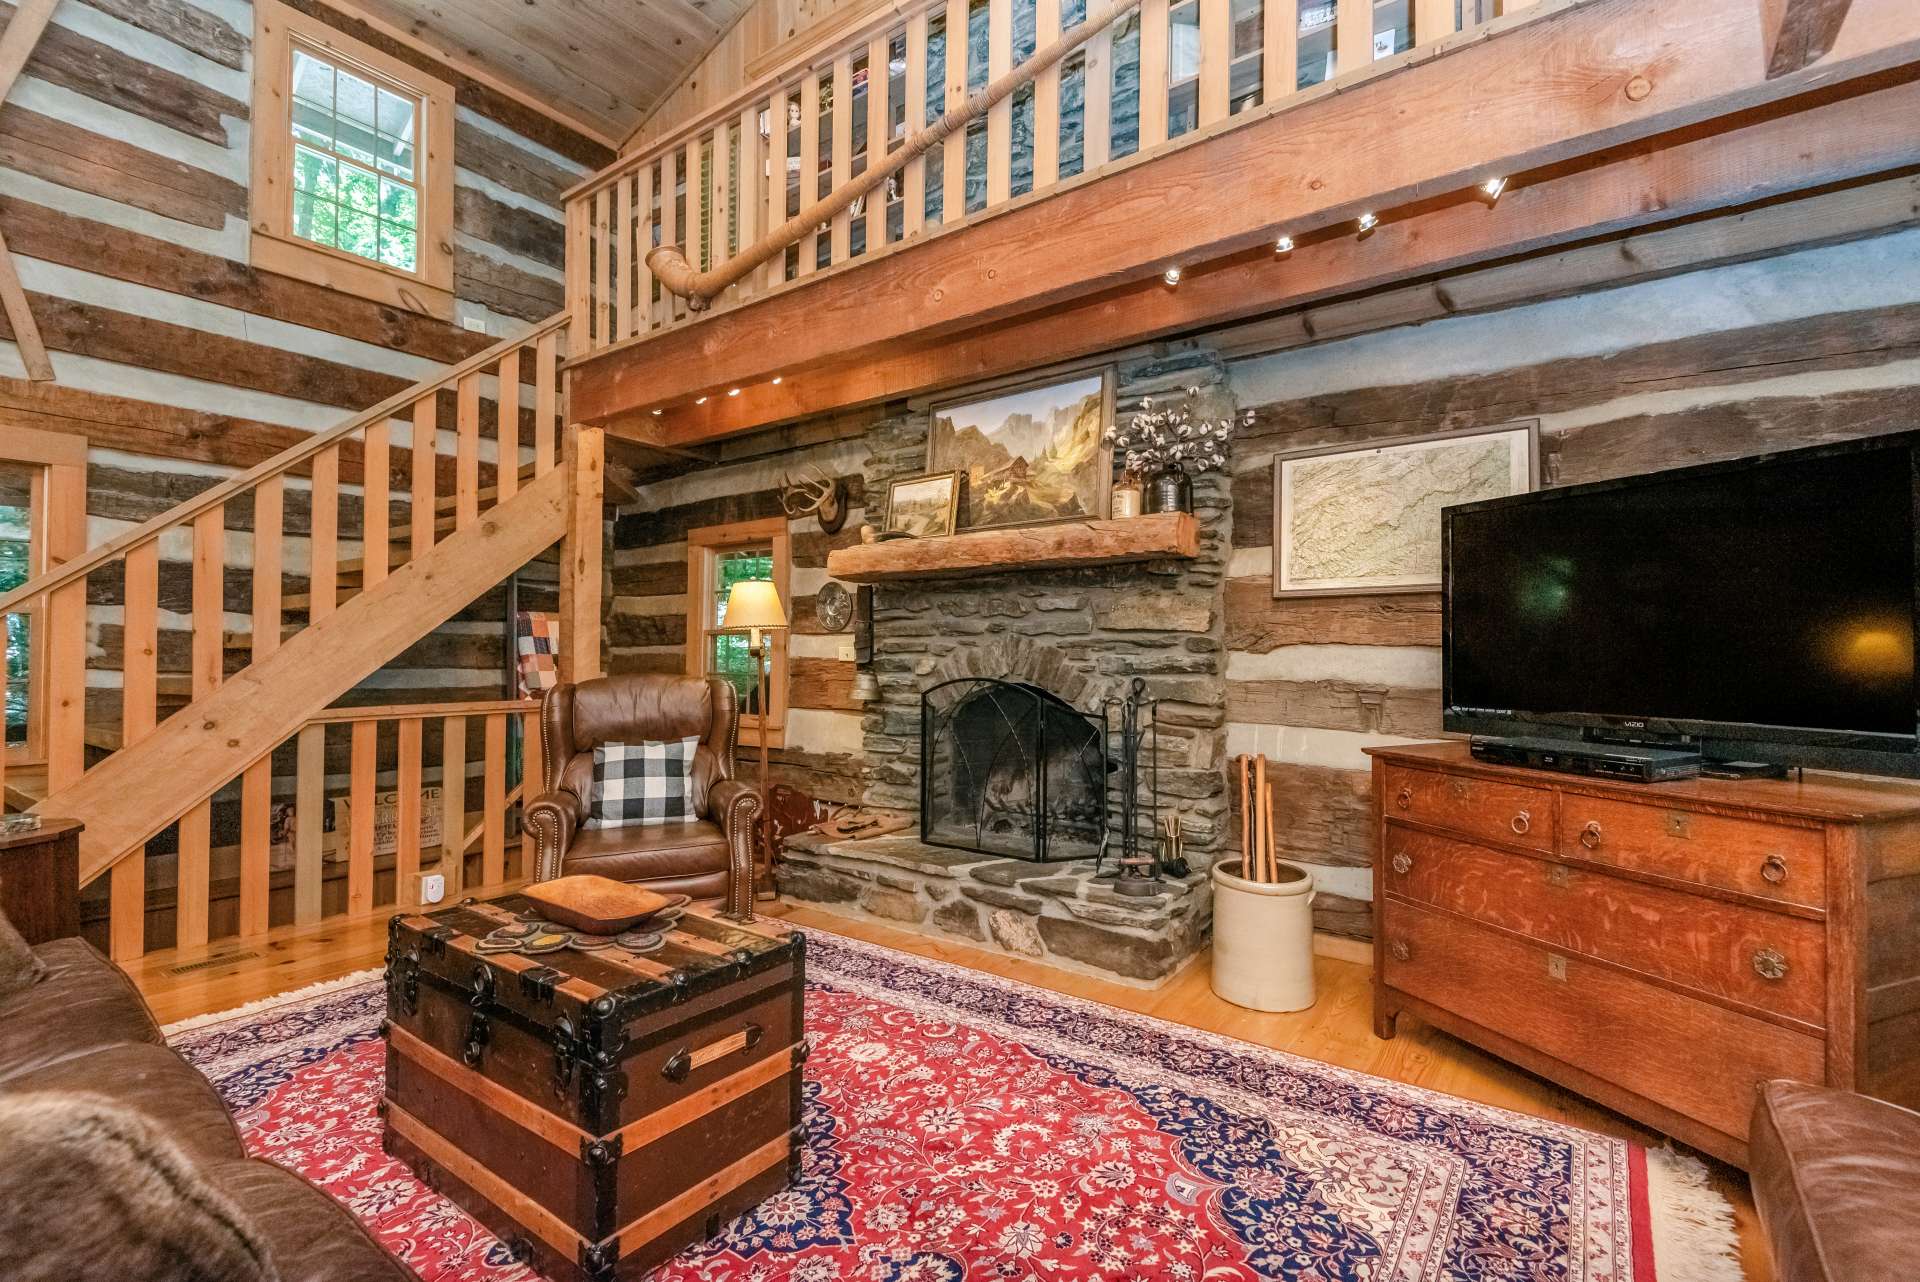 Main level living area offers a native stone fireplace to cozy up to loved ones.